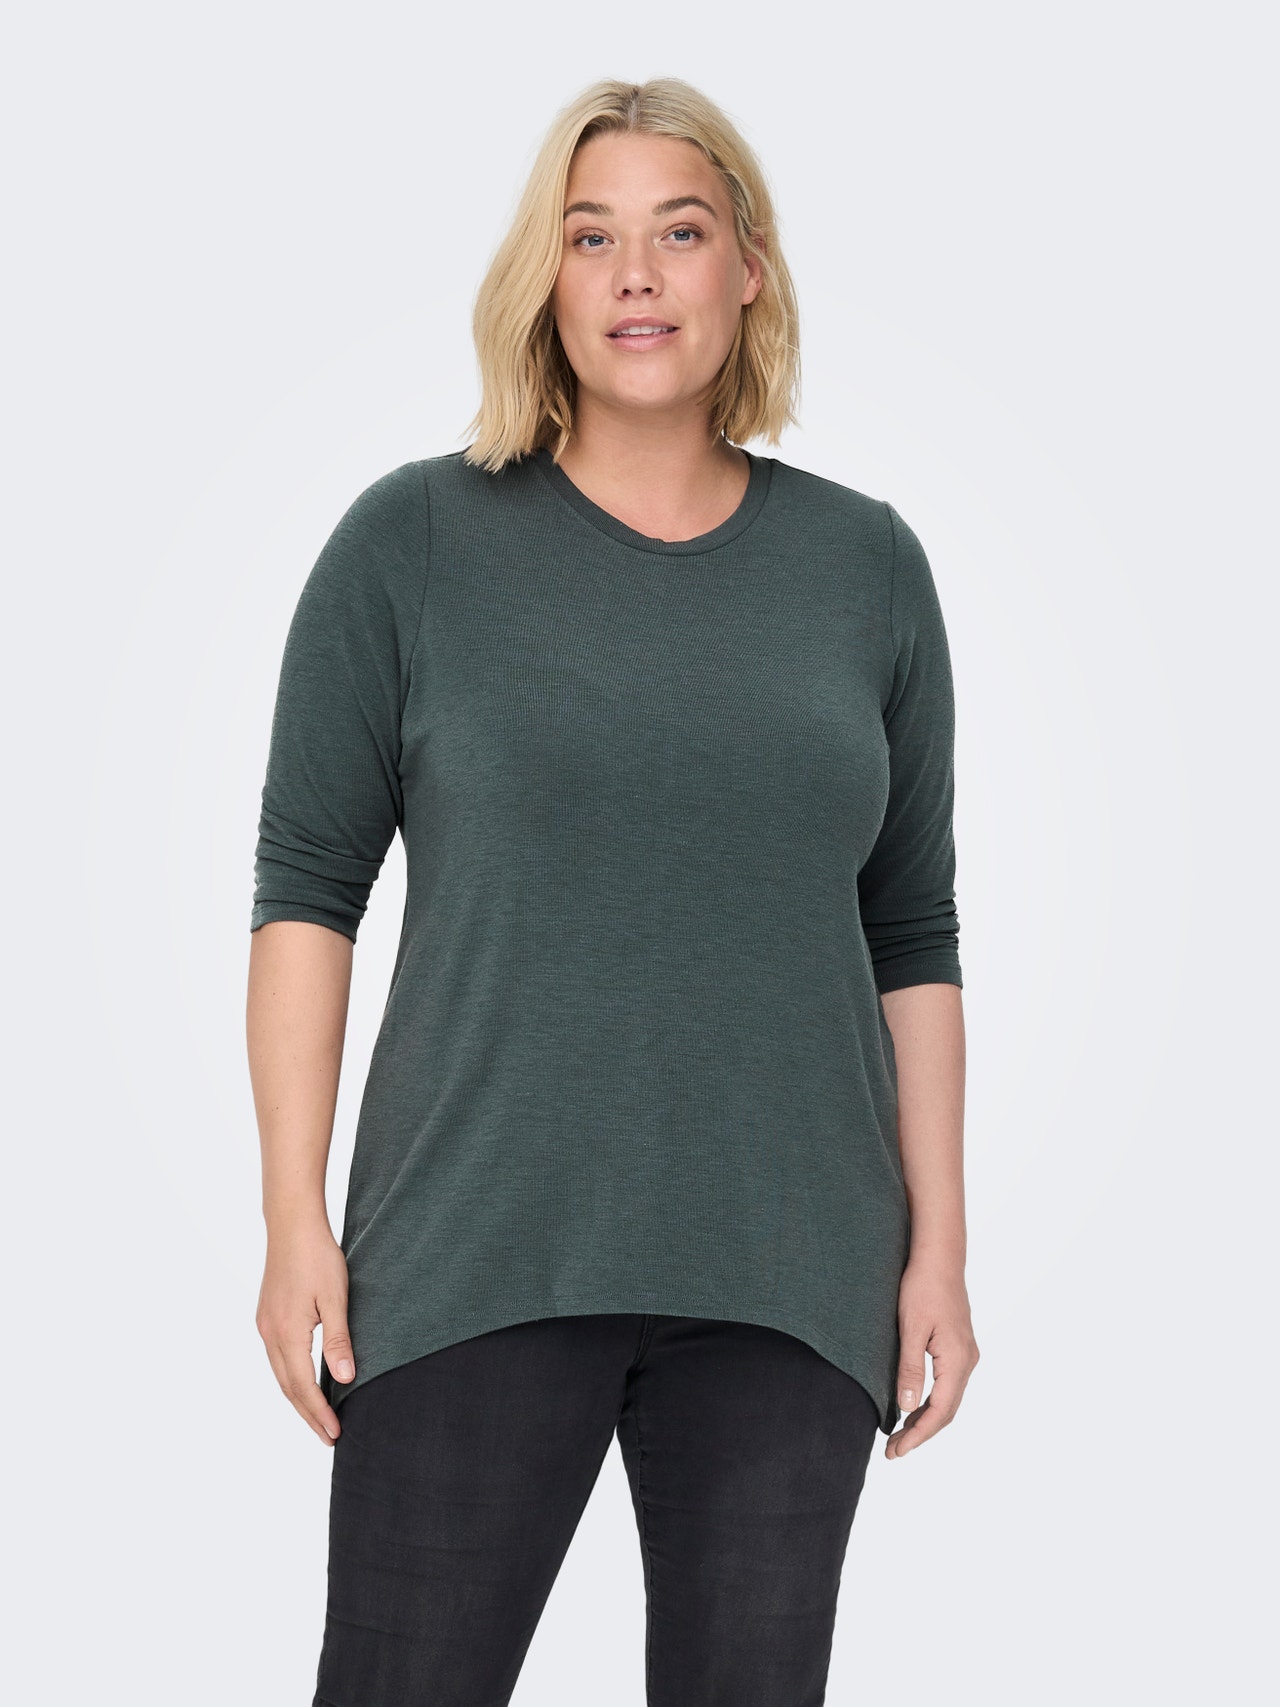 ONLY Curvy drapy Top -Balsam Green - 15293677